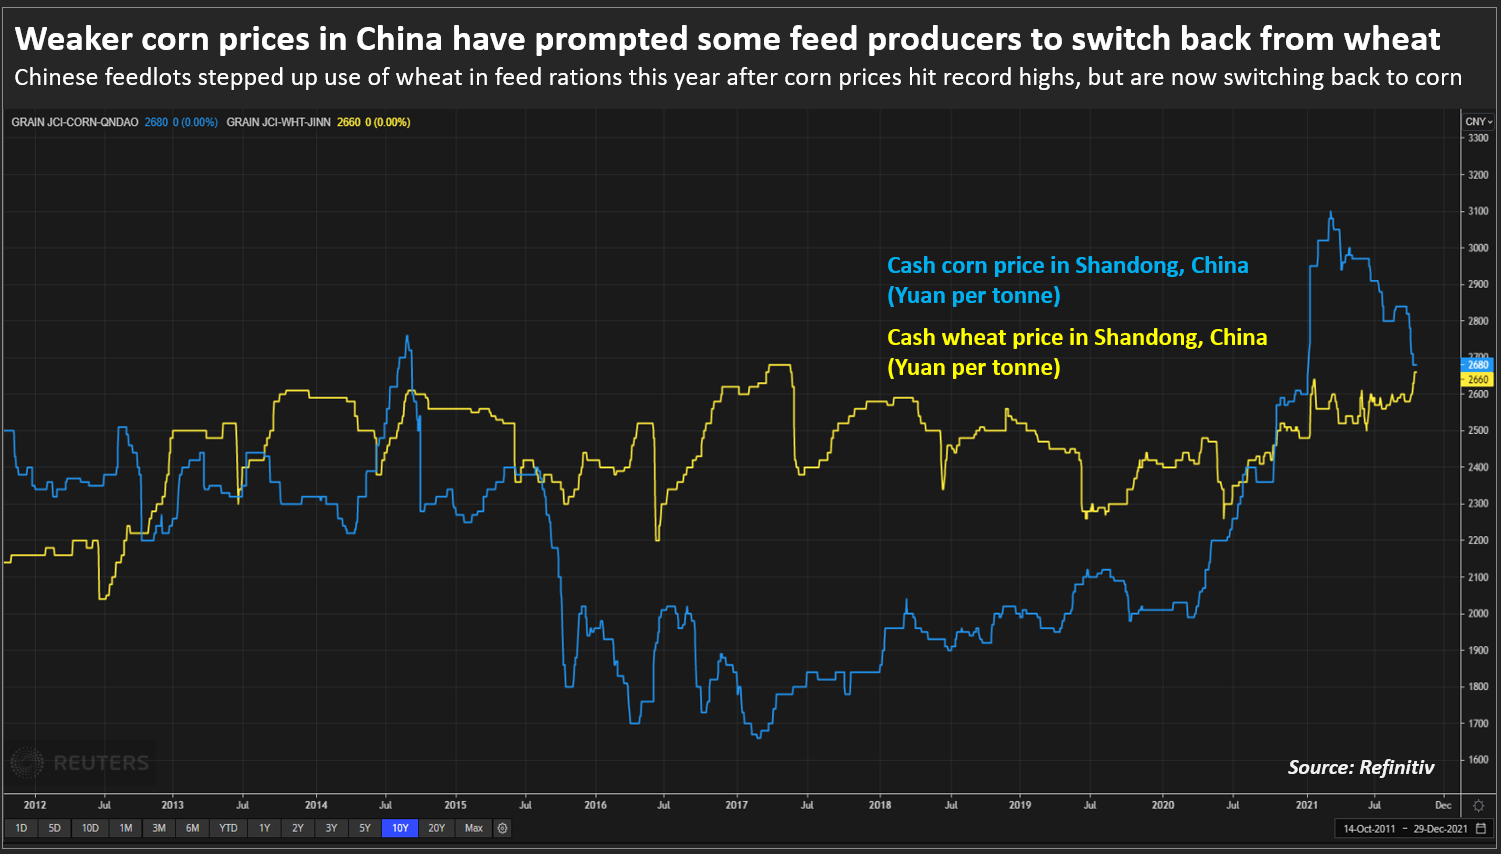 Weaker corn prices in China have prompted some feed producers to switch back from wheat